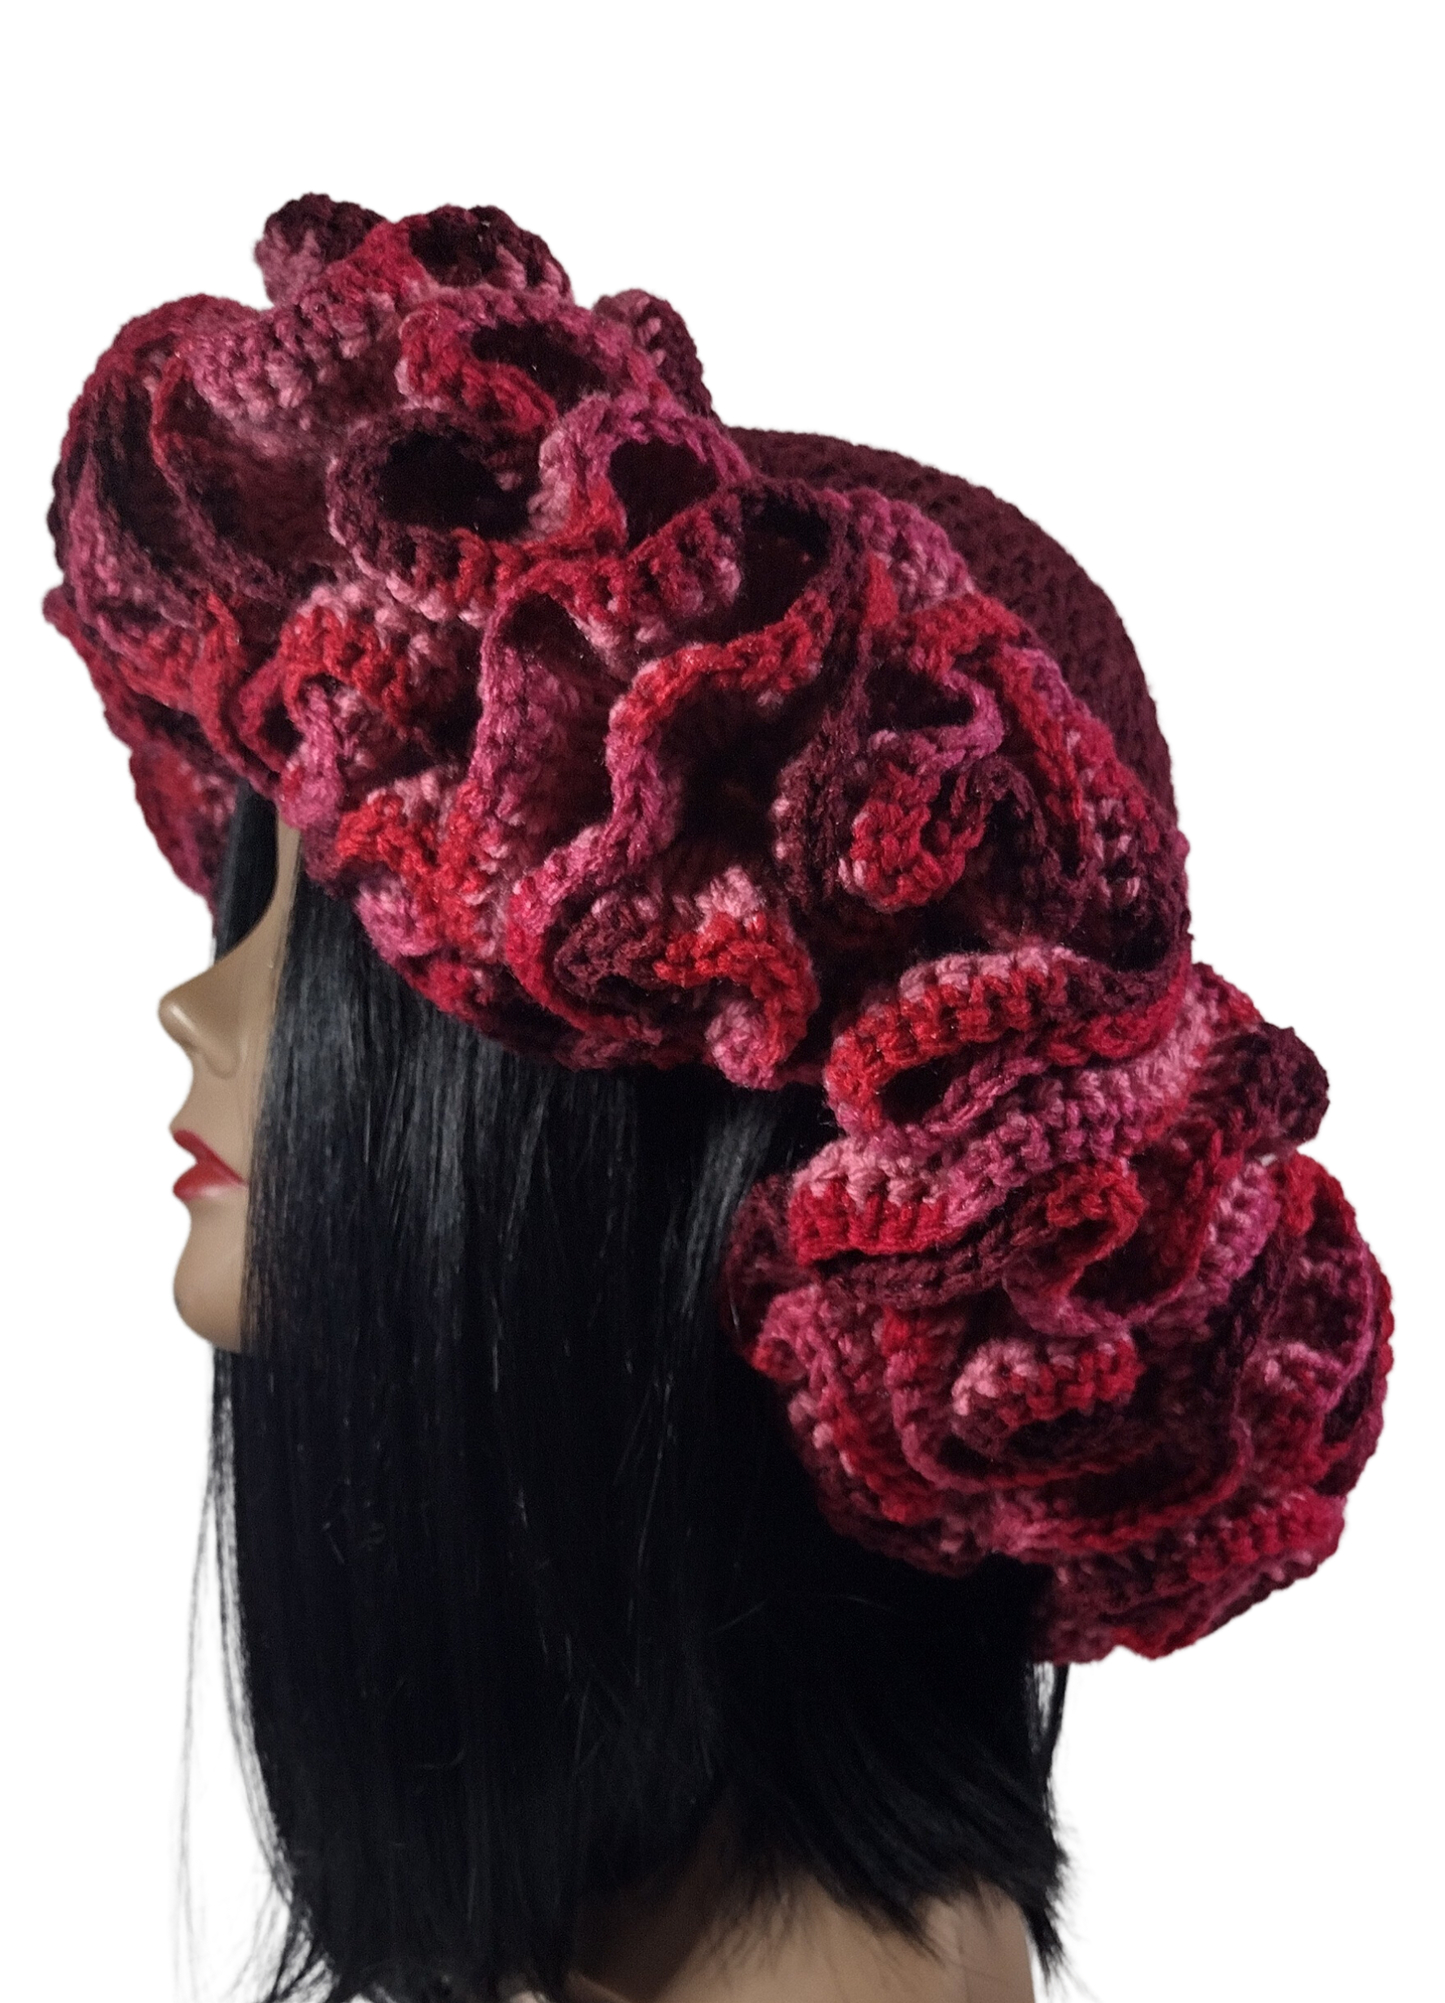 Blk Lotus Co's Deluxe Bloom Diva Crown: Burgundy Chic with a Splash of Colorful Flair